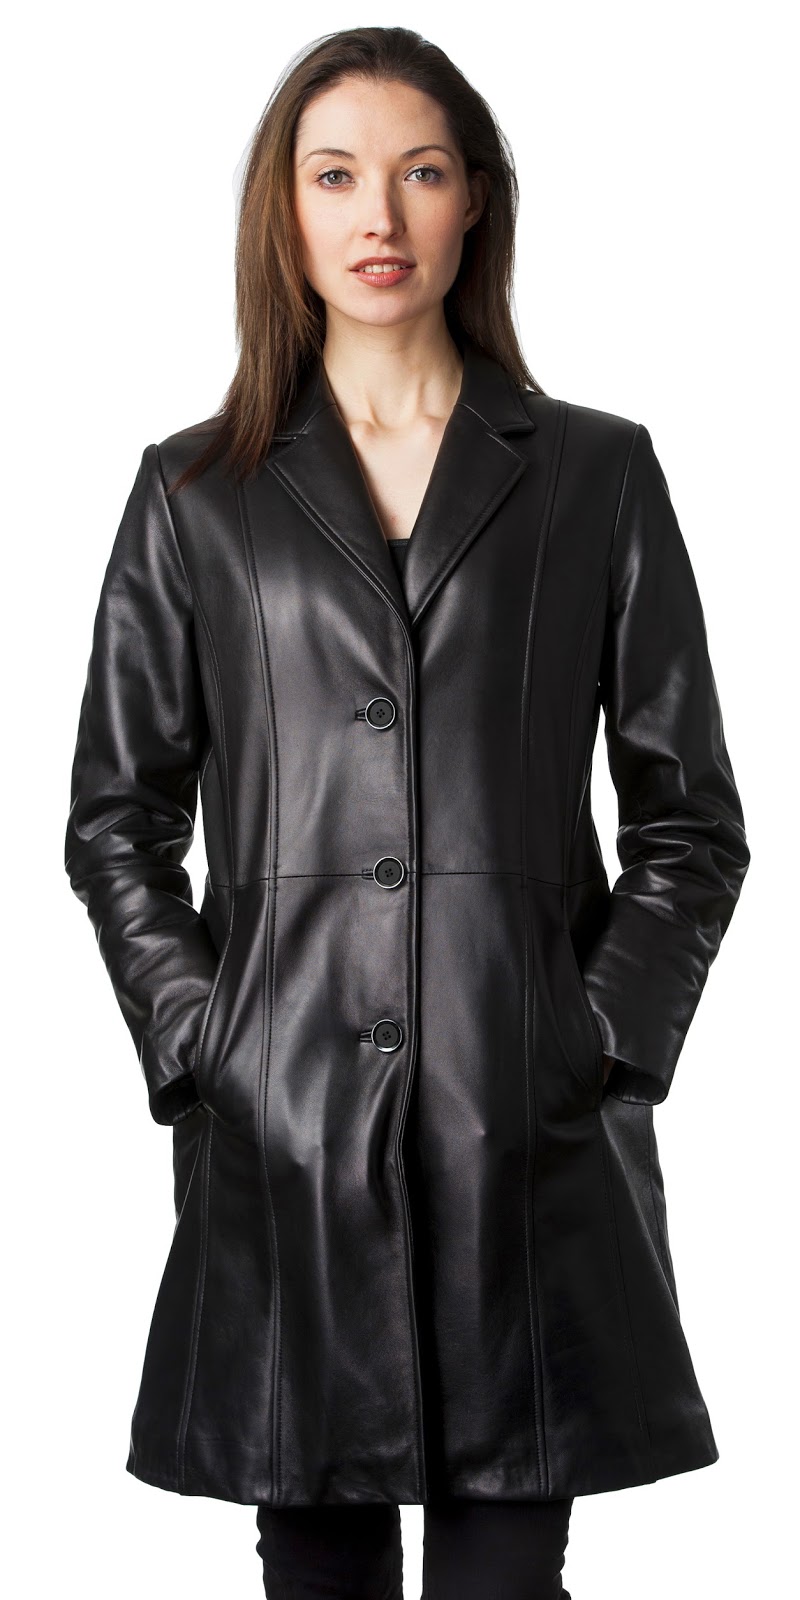 Leather Coat Daydreams: Overstock leather coats